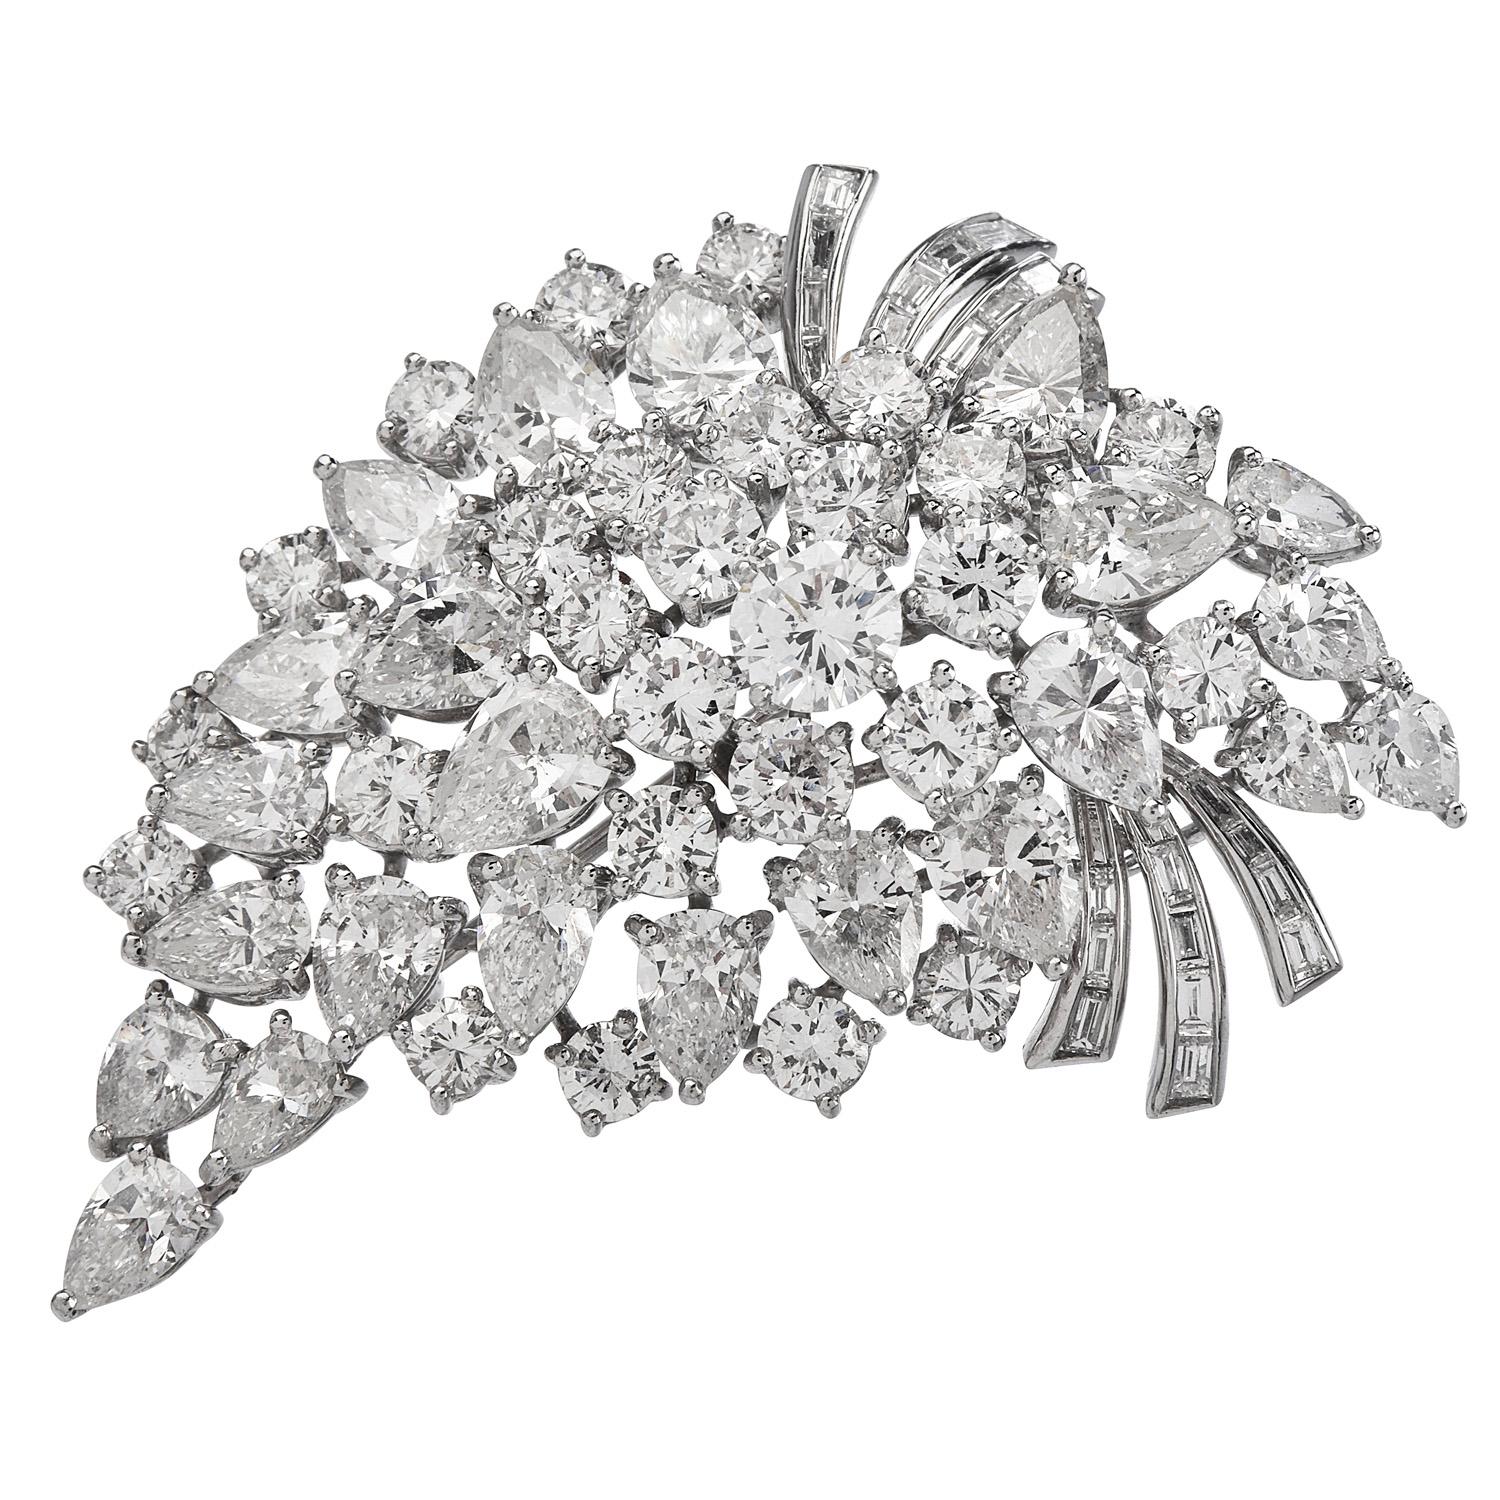 Dazzle yourself with this  Vintage 1970's Elwood Van Clief diamond platinum brooch pin pendant.

Exquisitely crafted in solid platinum, the floral pattern is created by Genuine Diamonds (27) round-cut, 
(23) pear-cut diamonds and (2) small